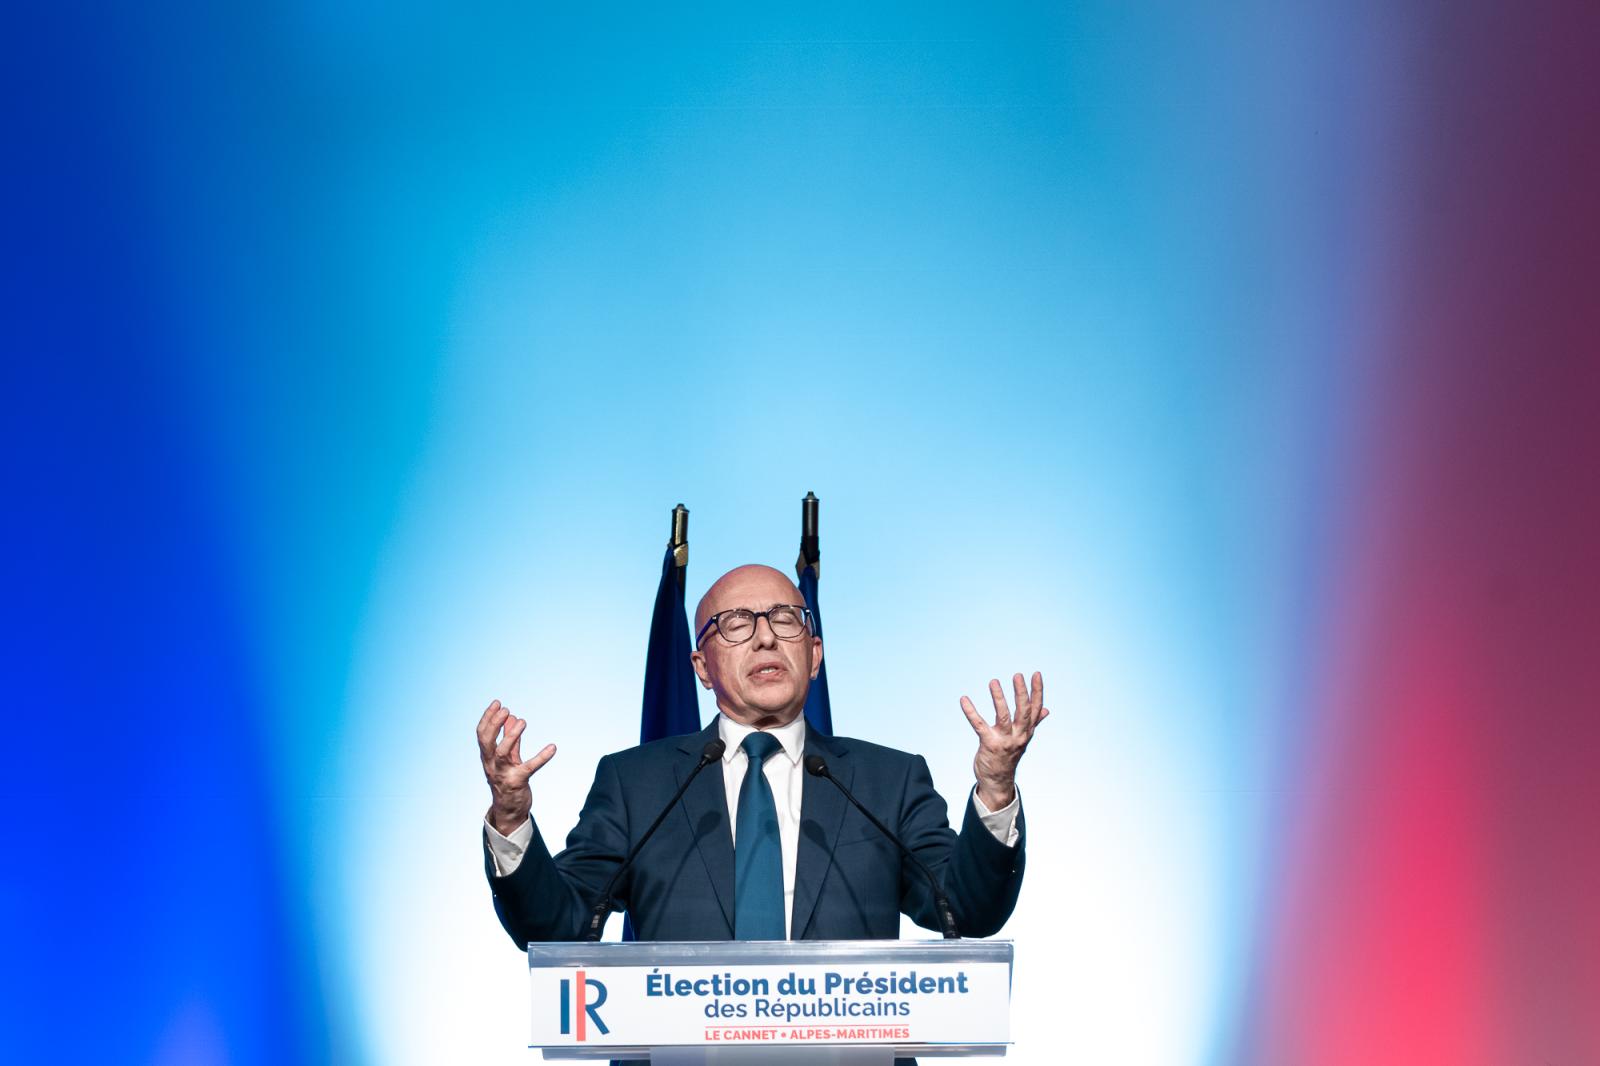 Image from politics - France, Le Cannet, 2022-11-27: Eric Ciotti is running for...